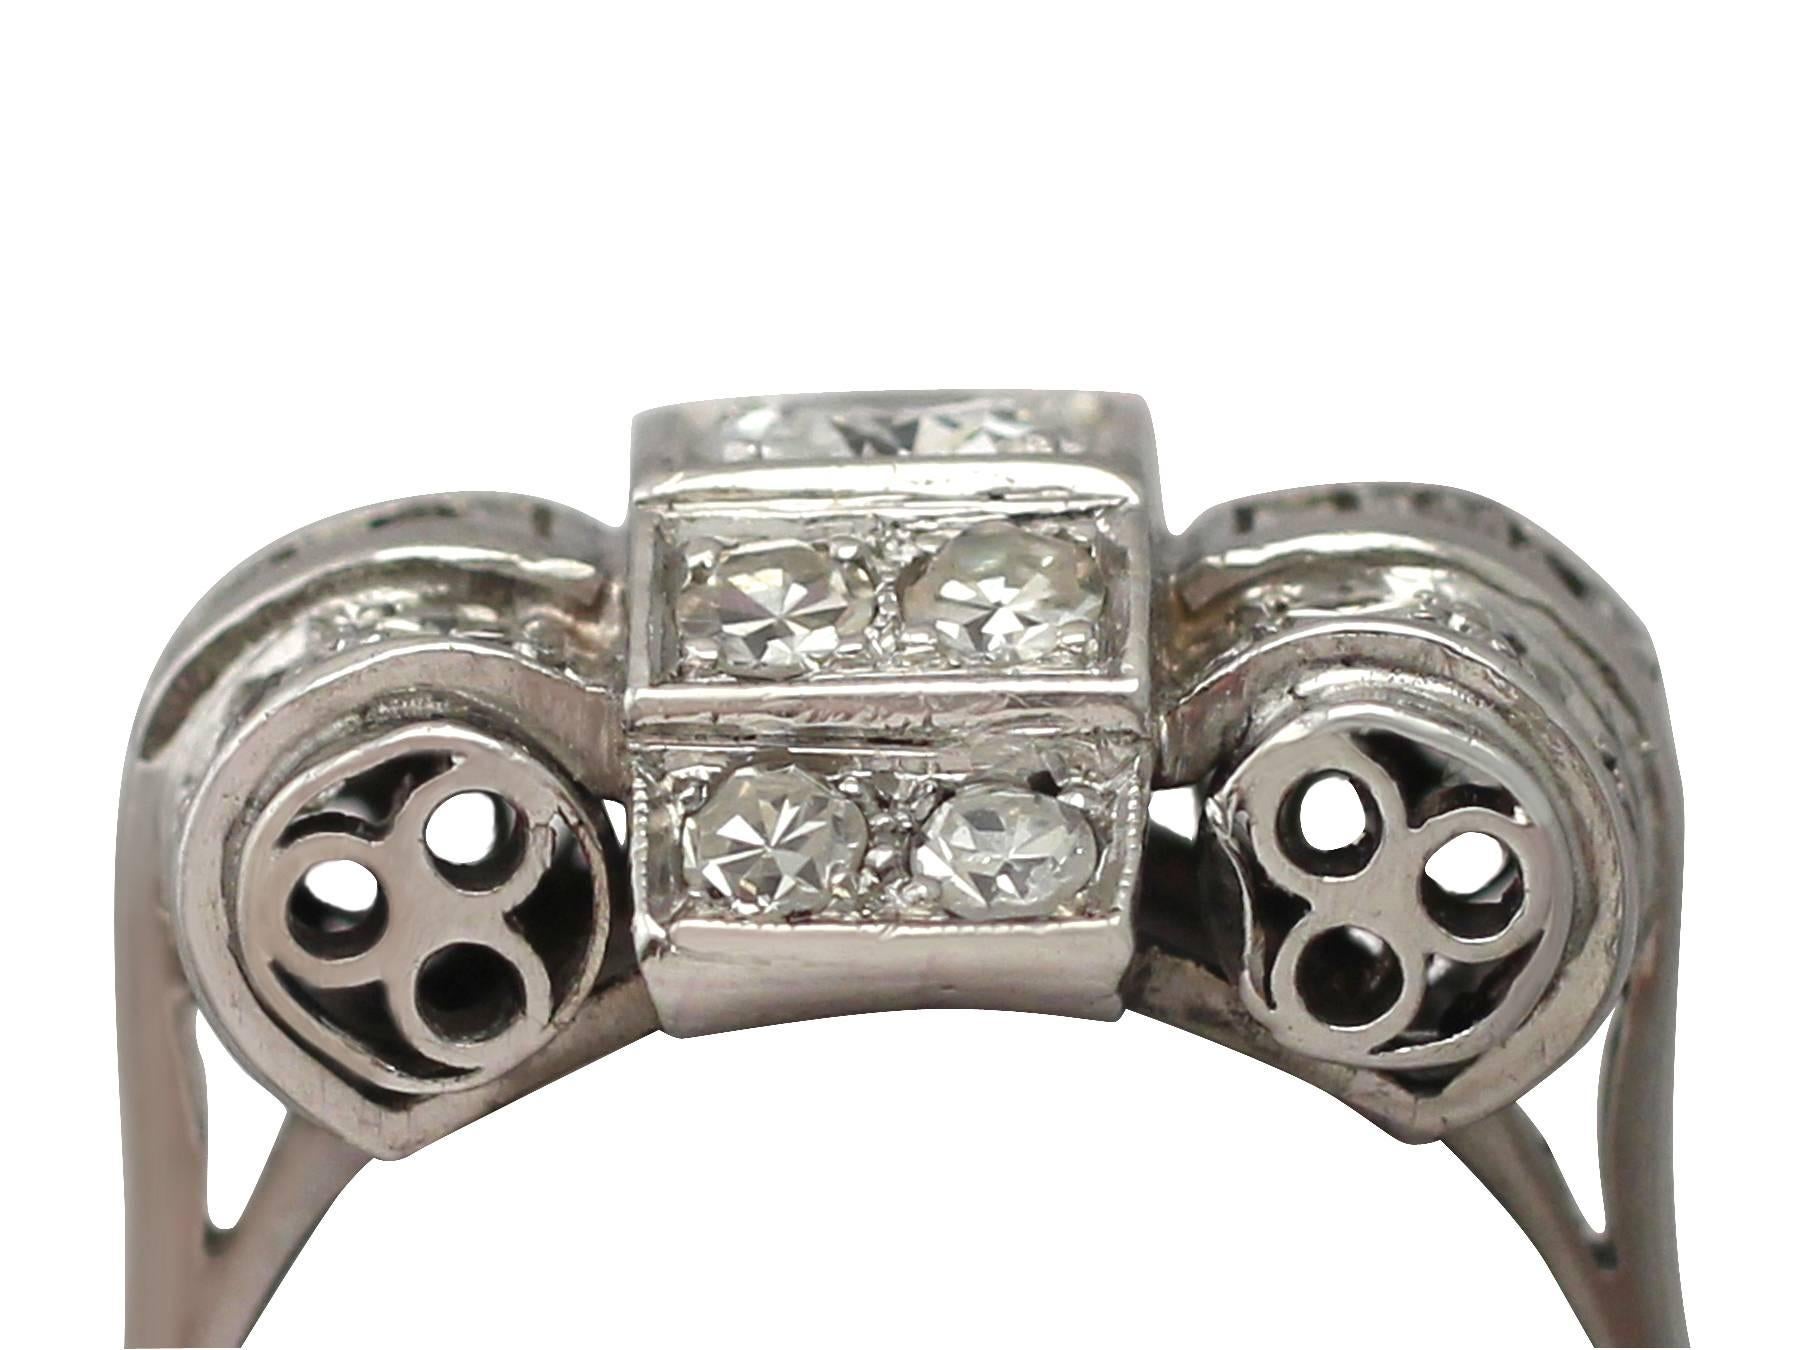 A stunning, fine and impressive 1.61 carat diamond (total) and 18k white gold dress ring in the Art Deco style; part of our diverse antique jewellery and estate jewelry collections

This stunning antique French diamond cluster ring has been crafted